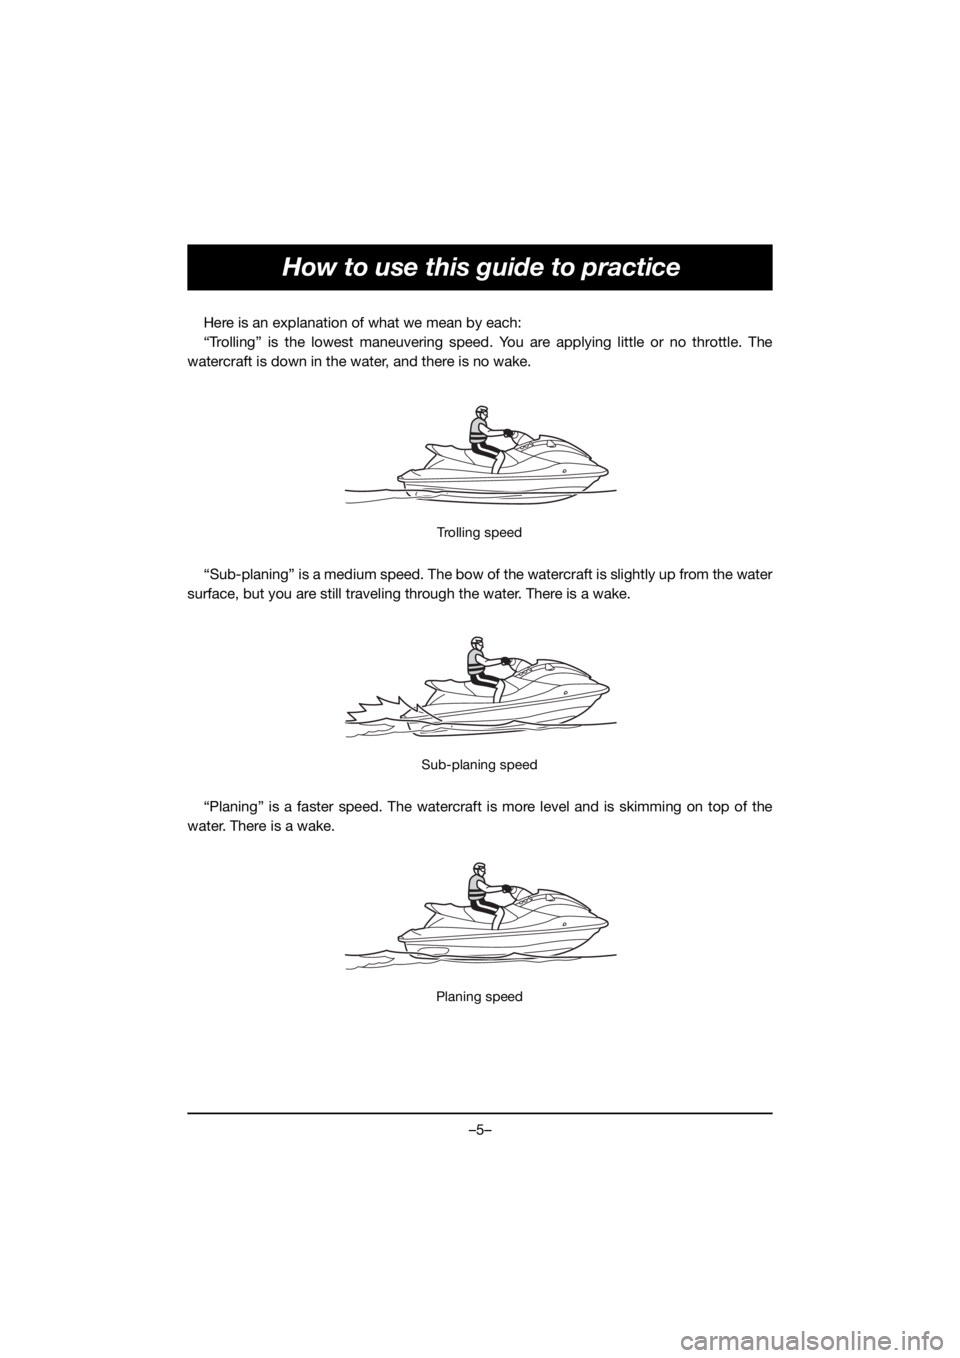 YAMAHA VX DELUXE 2020  Manuale de Empleo (in Spanish) –5–
How to use this guide to practice
Here is an explanation of what we mean by each:
“Trolling” is the lowest maneuvering speed. You are applying little or no throttle. The
watercraft is down